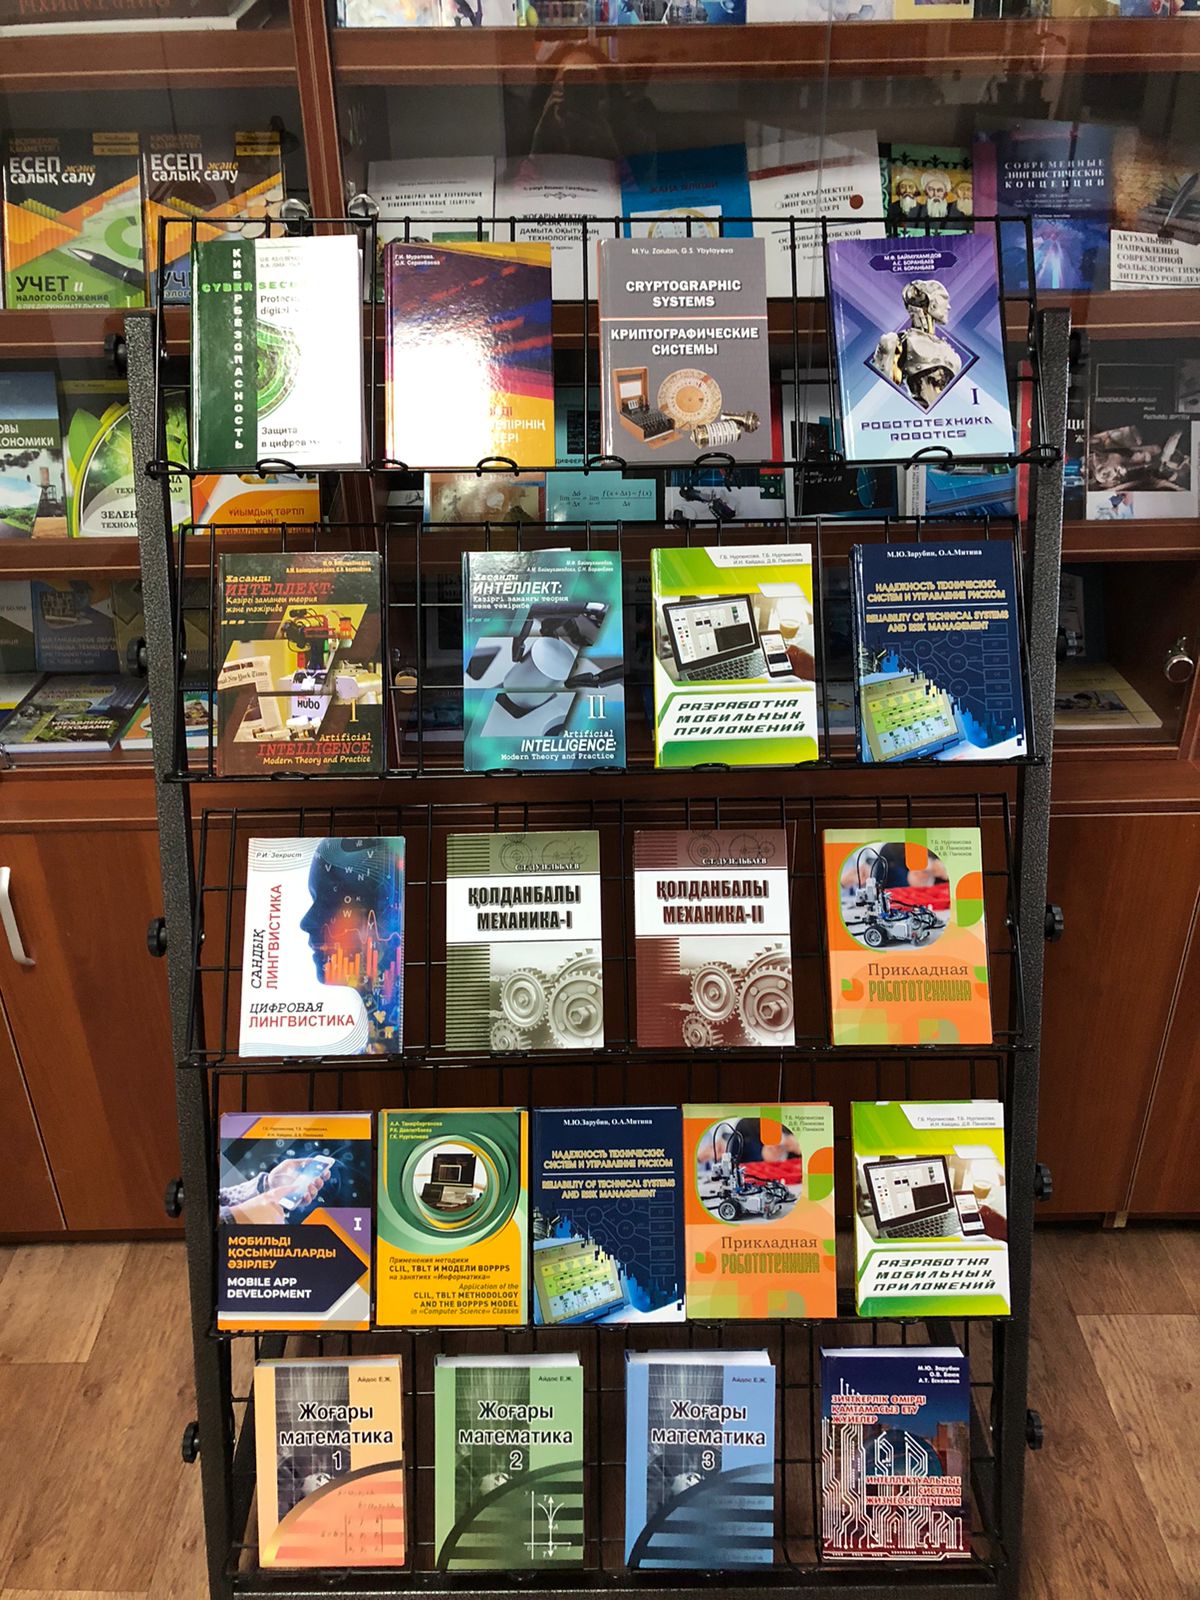 Introducing new textbooks